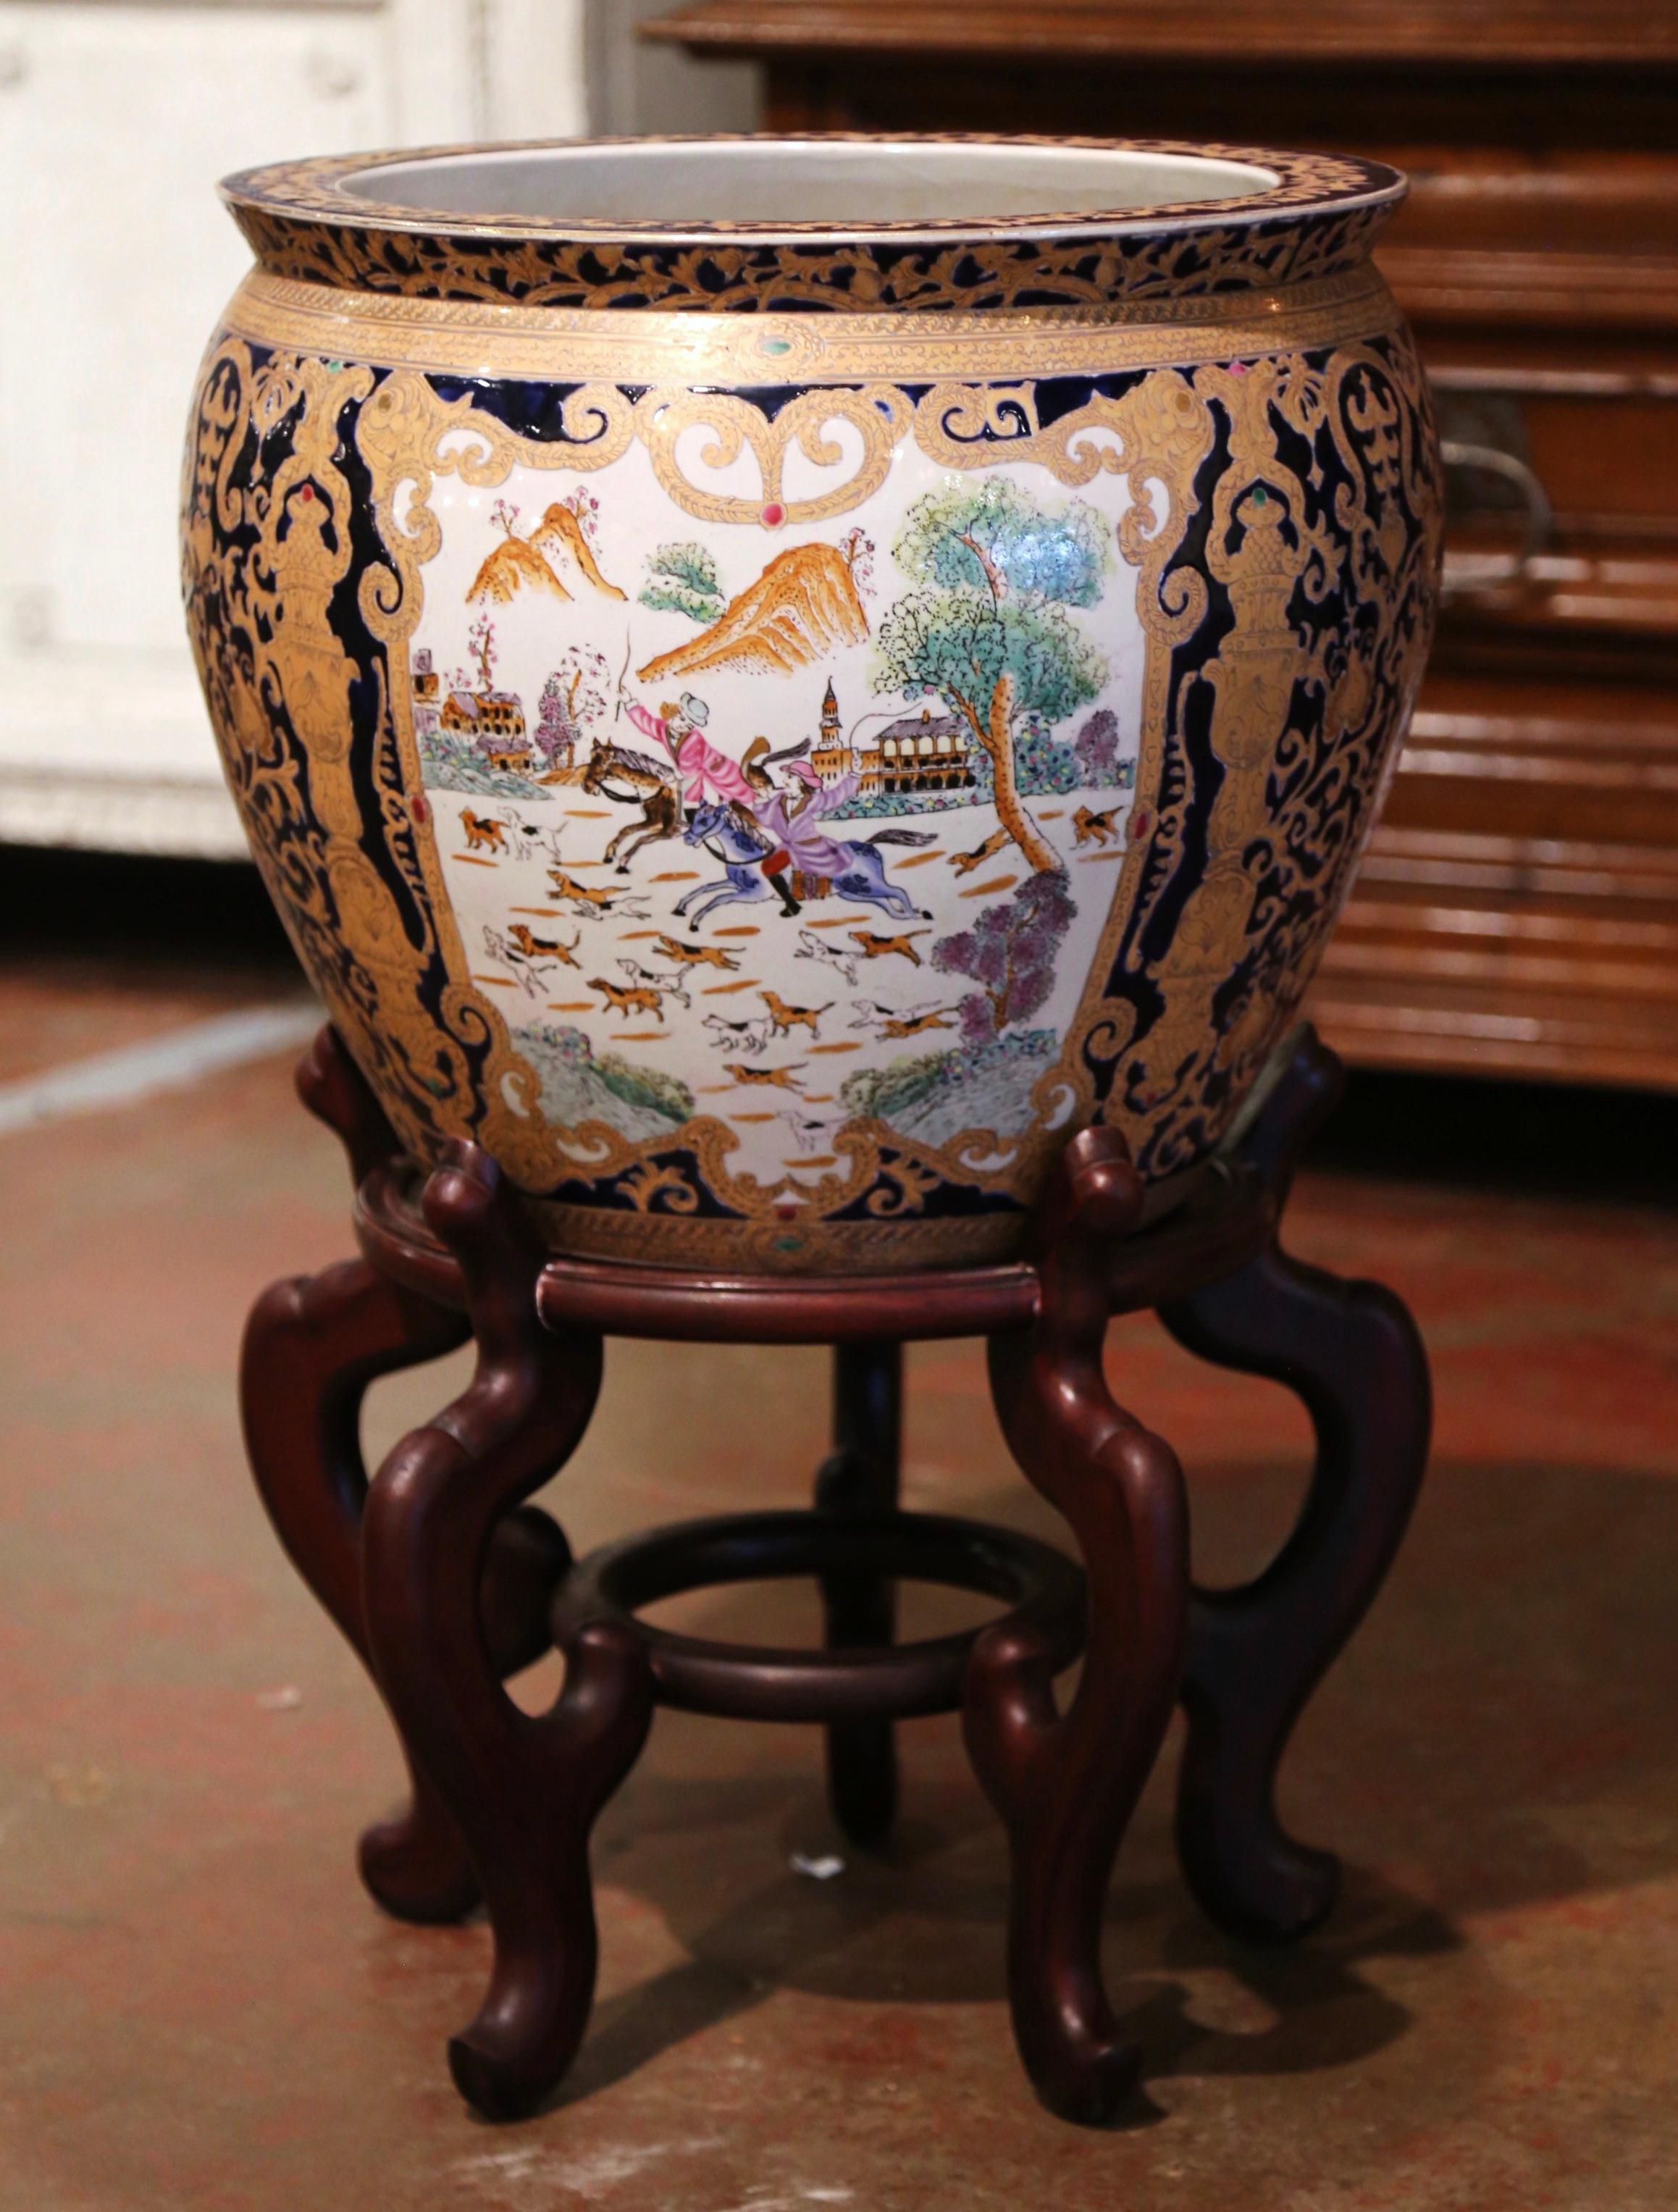 This elegant and colorful vintage fishbowl standing on a carved fruitwood base was created in China, circa 1960. Round in shape, the large, exotic porcelain planter features Classic oriental scenes with Chinese people throughout, and embellished